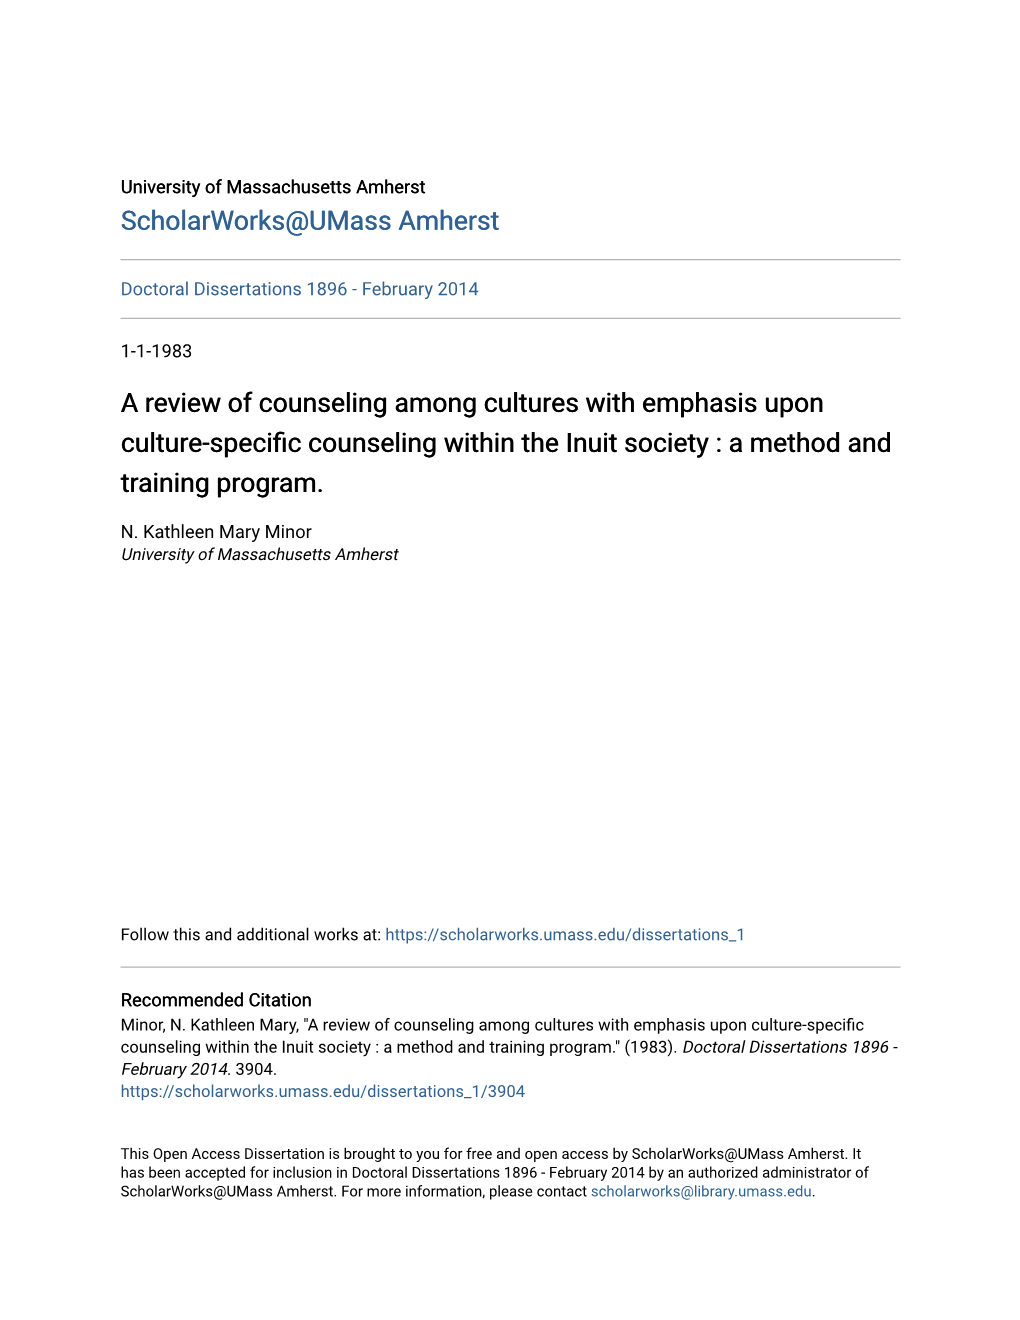 A Review of Counseling Among Cultures with Emphasis Upon Culture-Specific Counseling Within the Inuit Society : a Method and Training Program